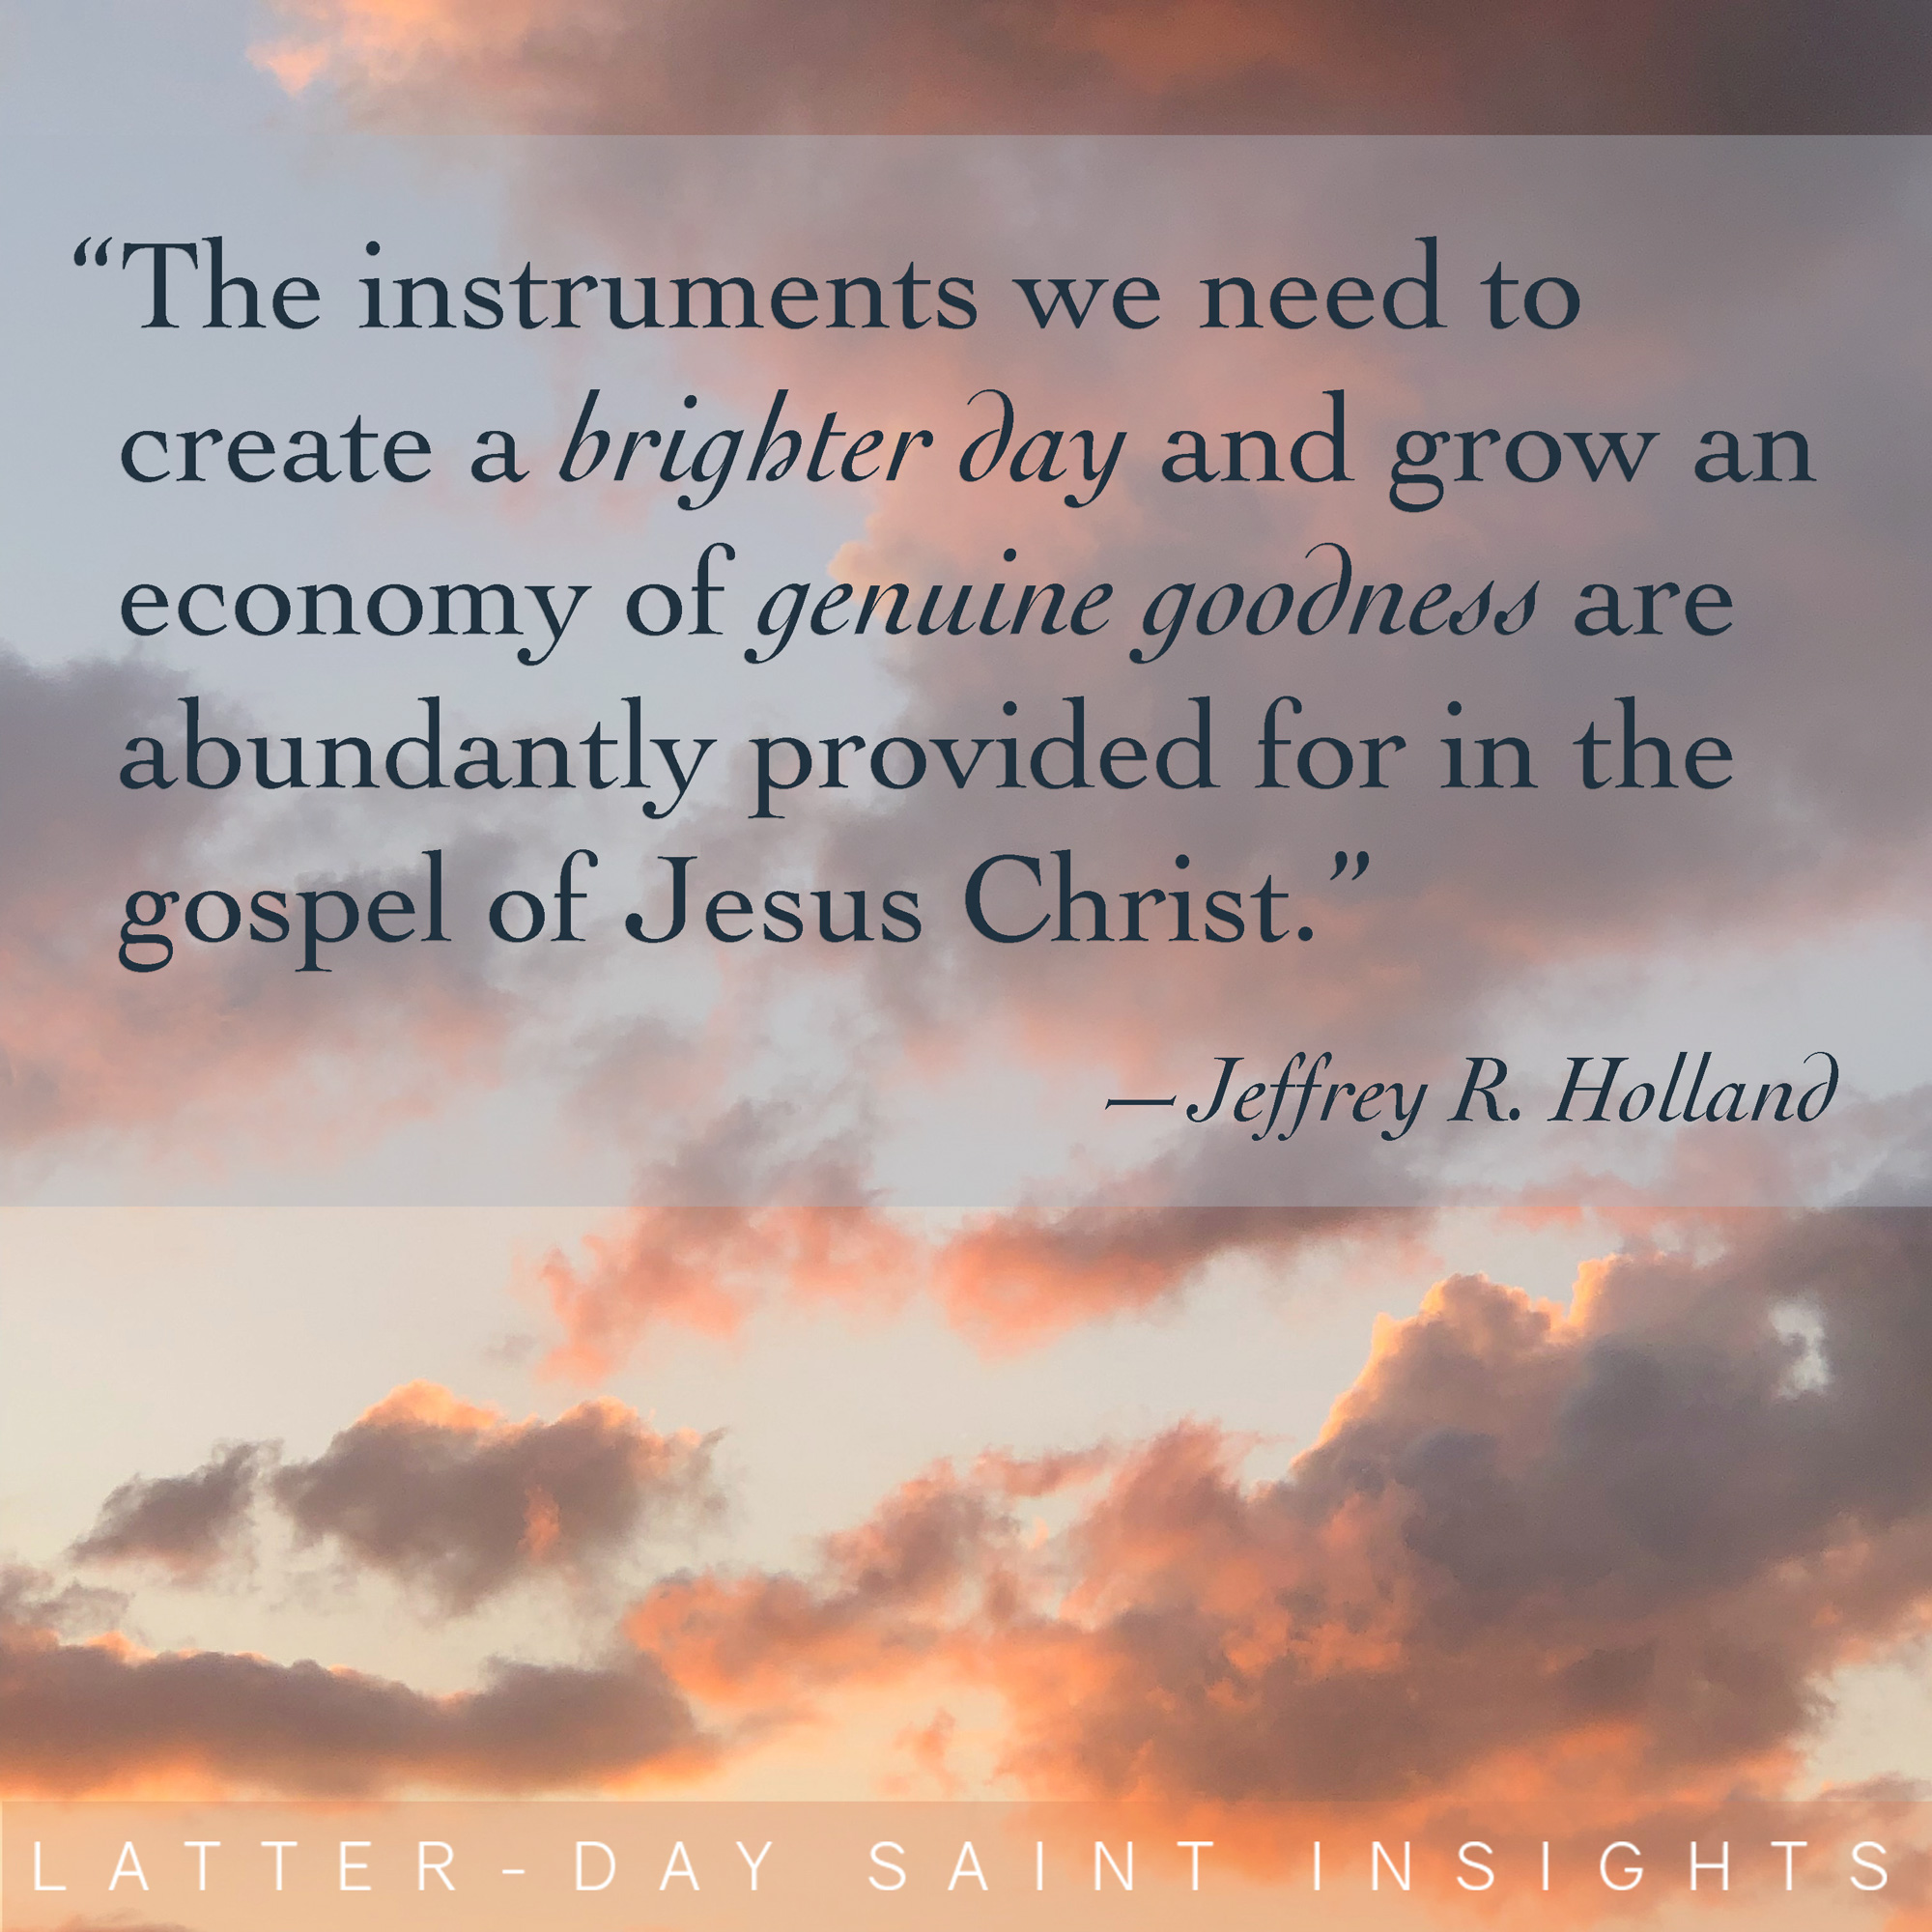 The instruments we need to create a brighter day and grow an economy of genuine goodness are abundantly provided for in the gospel of Jesus Christ.” -Jeffrey R. Holland